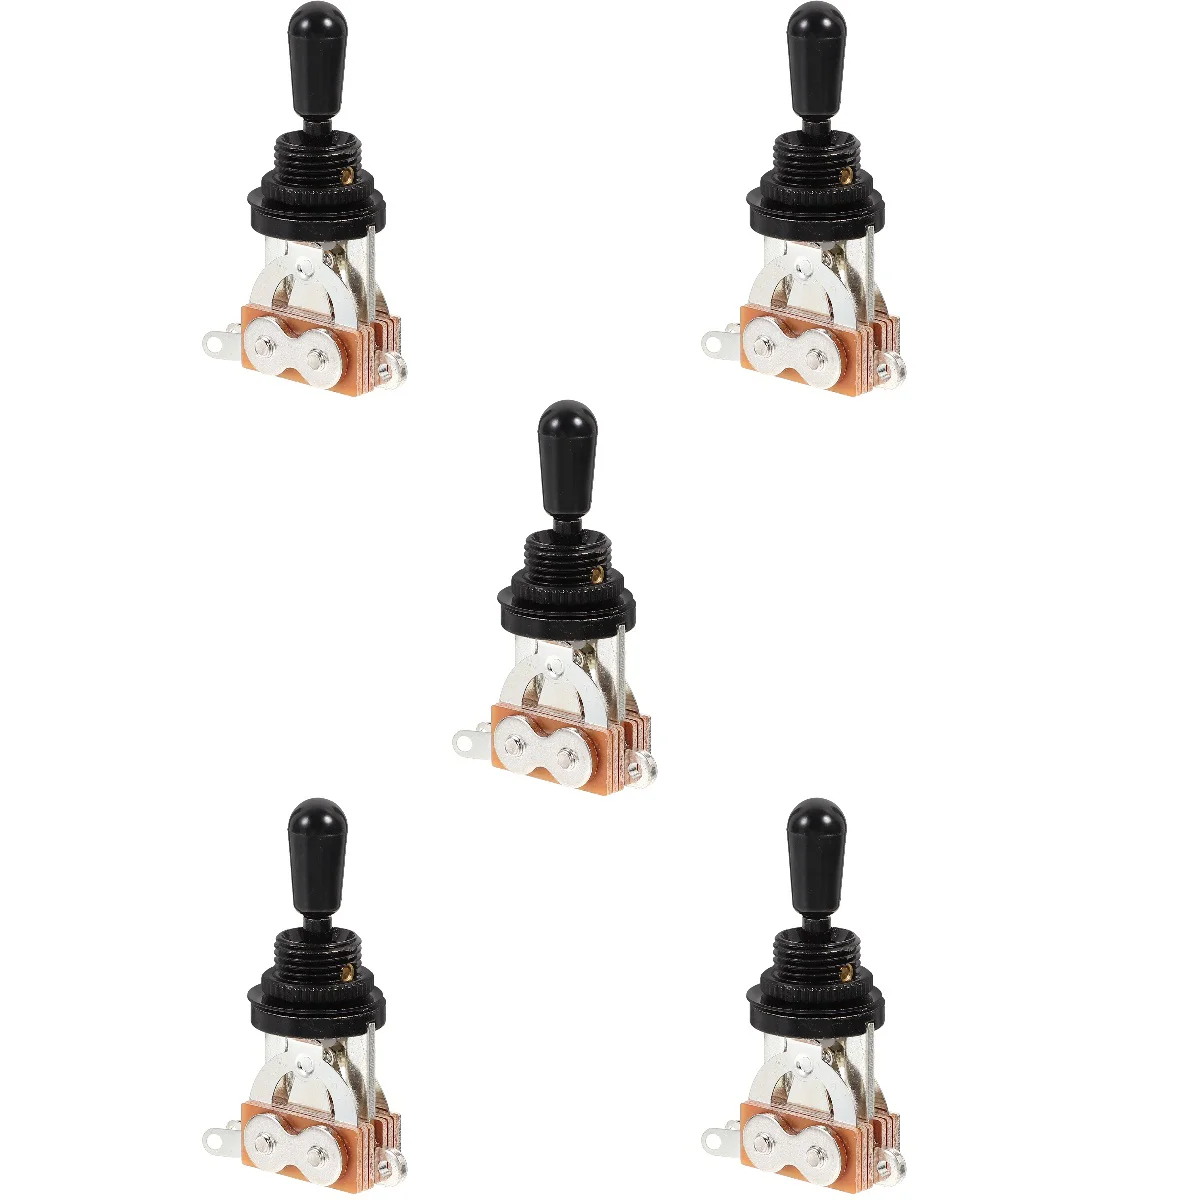 

Set 5 Guitar Three Position Switch Mini Accessories Electric 3-Way Toggle Supplies Pickup Plastic Selector